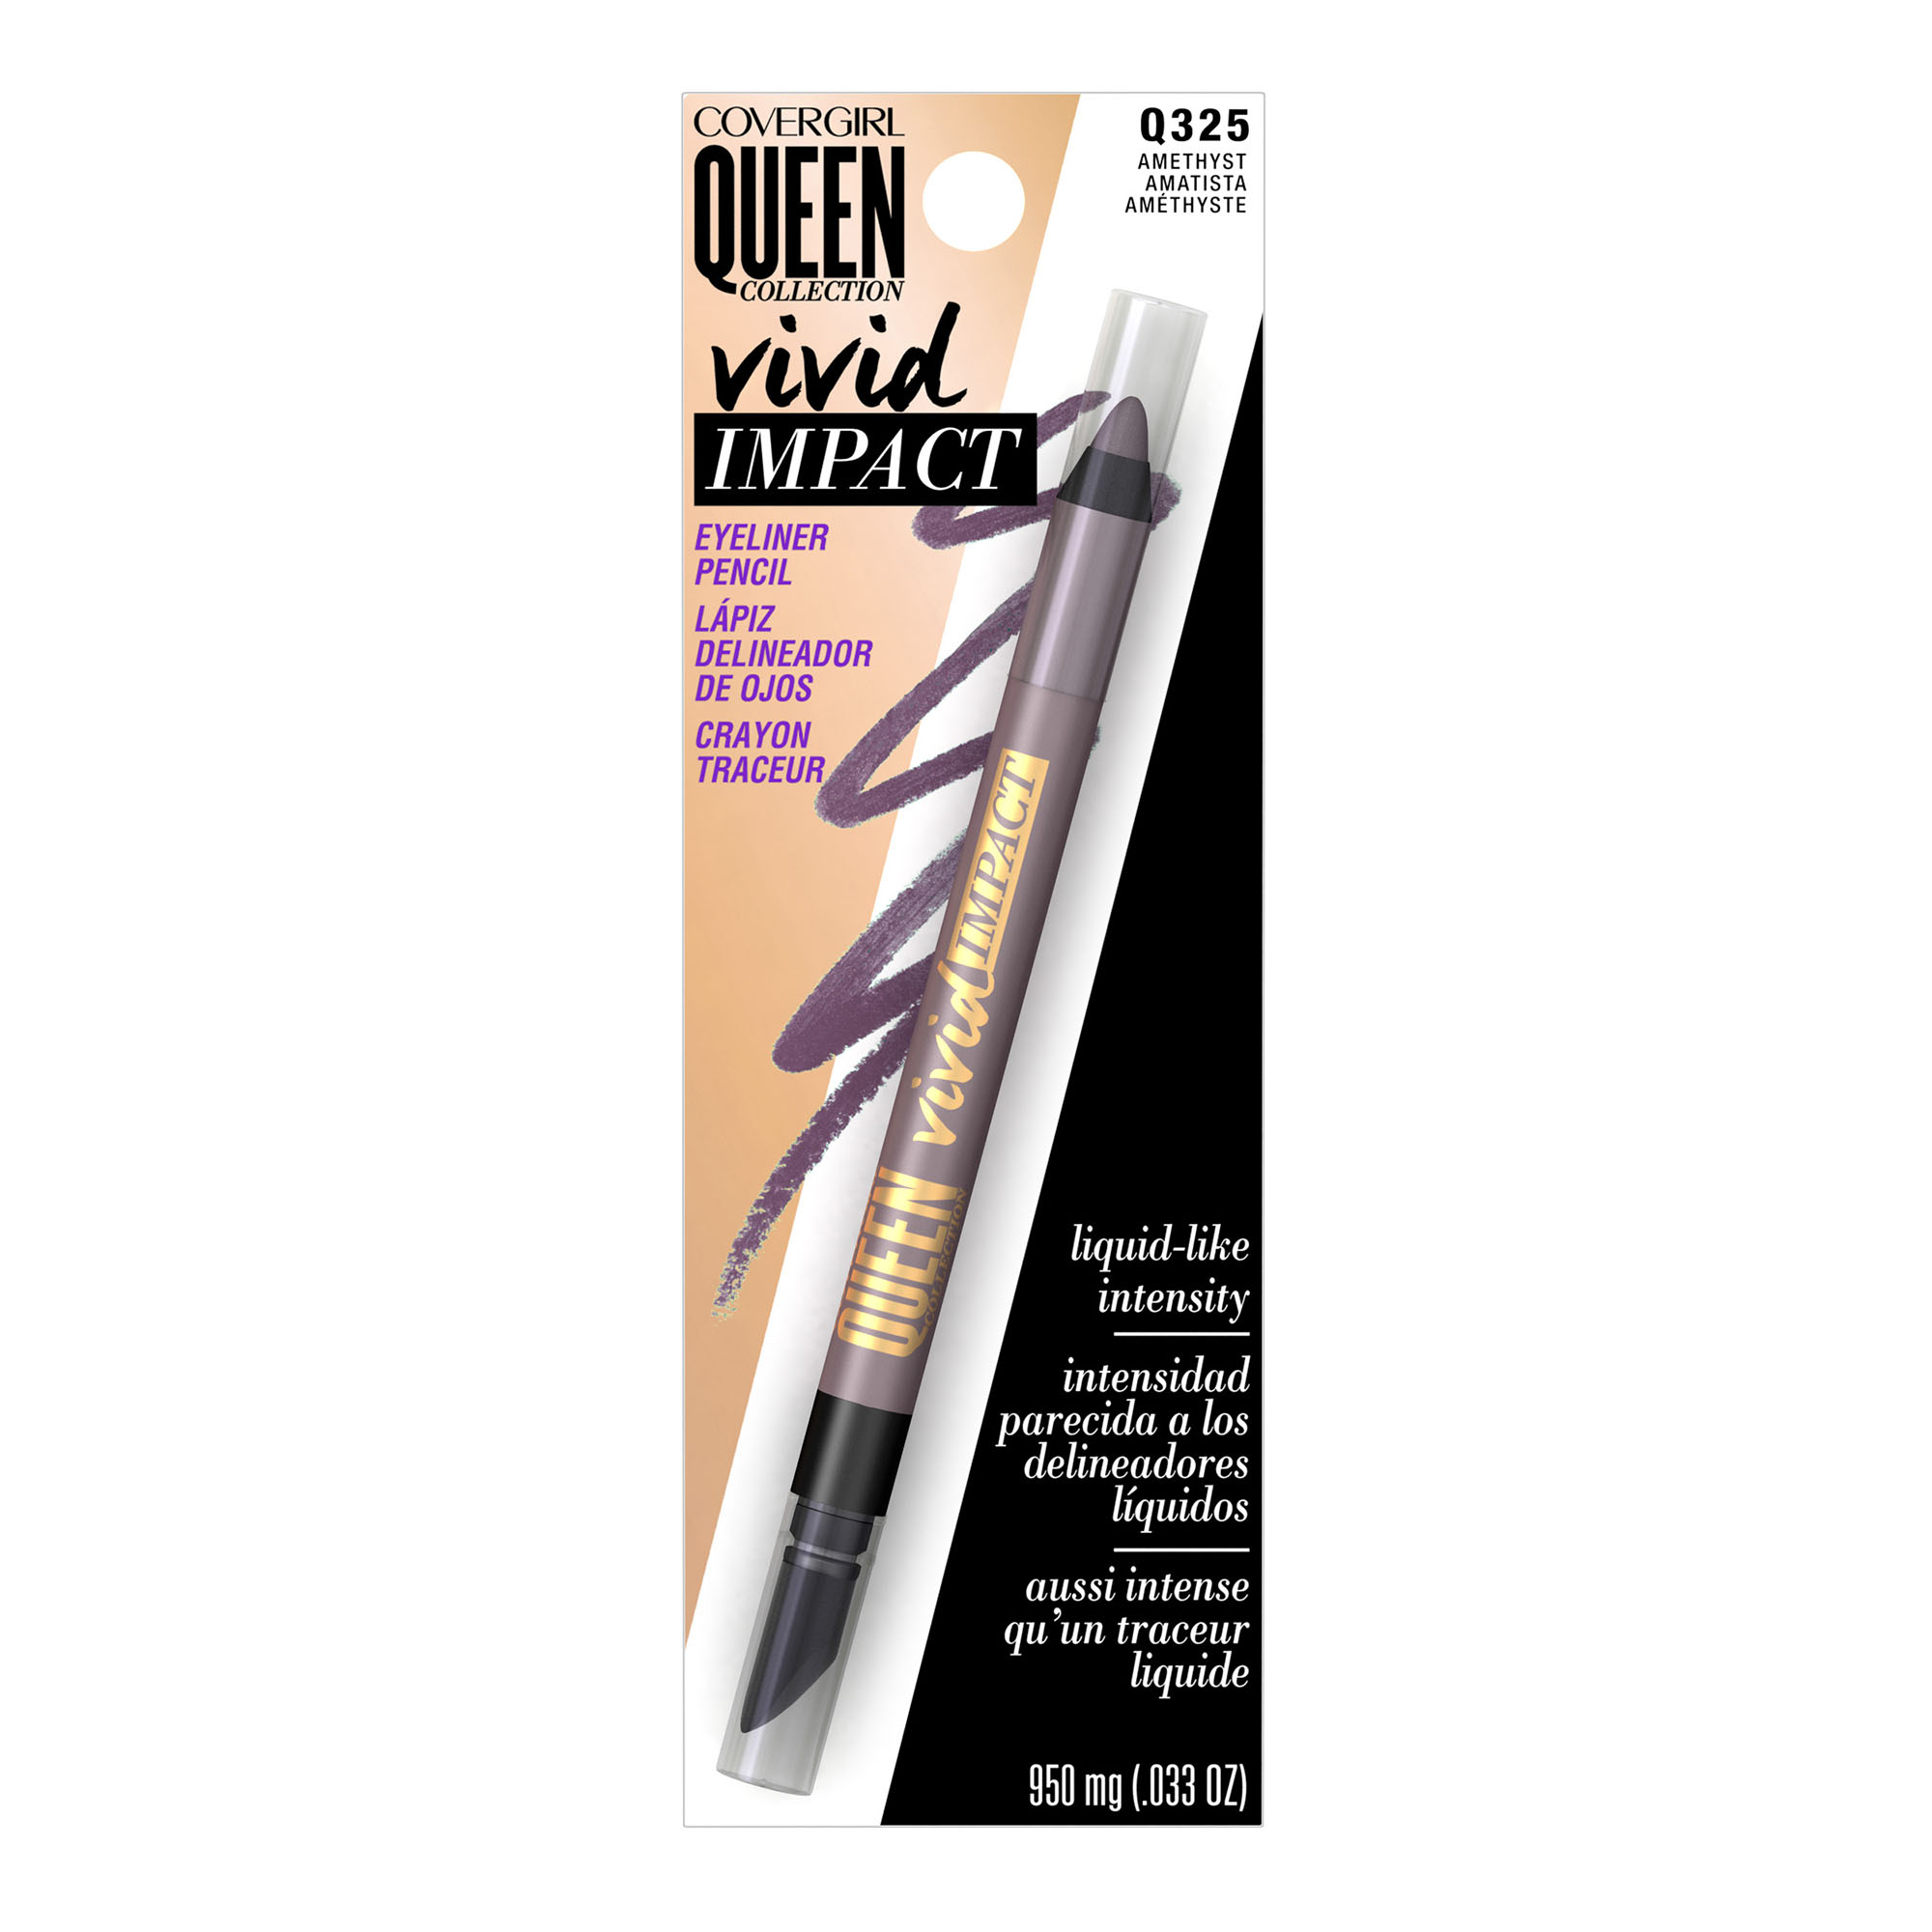 COVERGIRL Queen Collection Vivid Impact Eyeliner Amethyst .033 oz (950 mg) - image 1 of 2